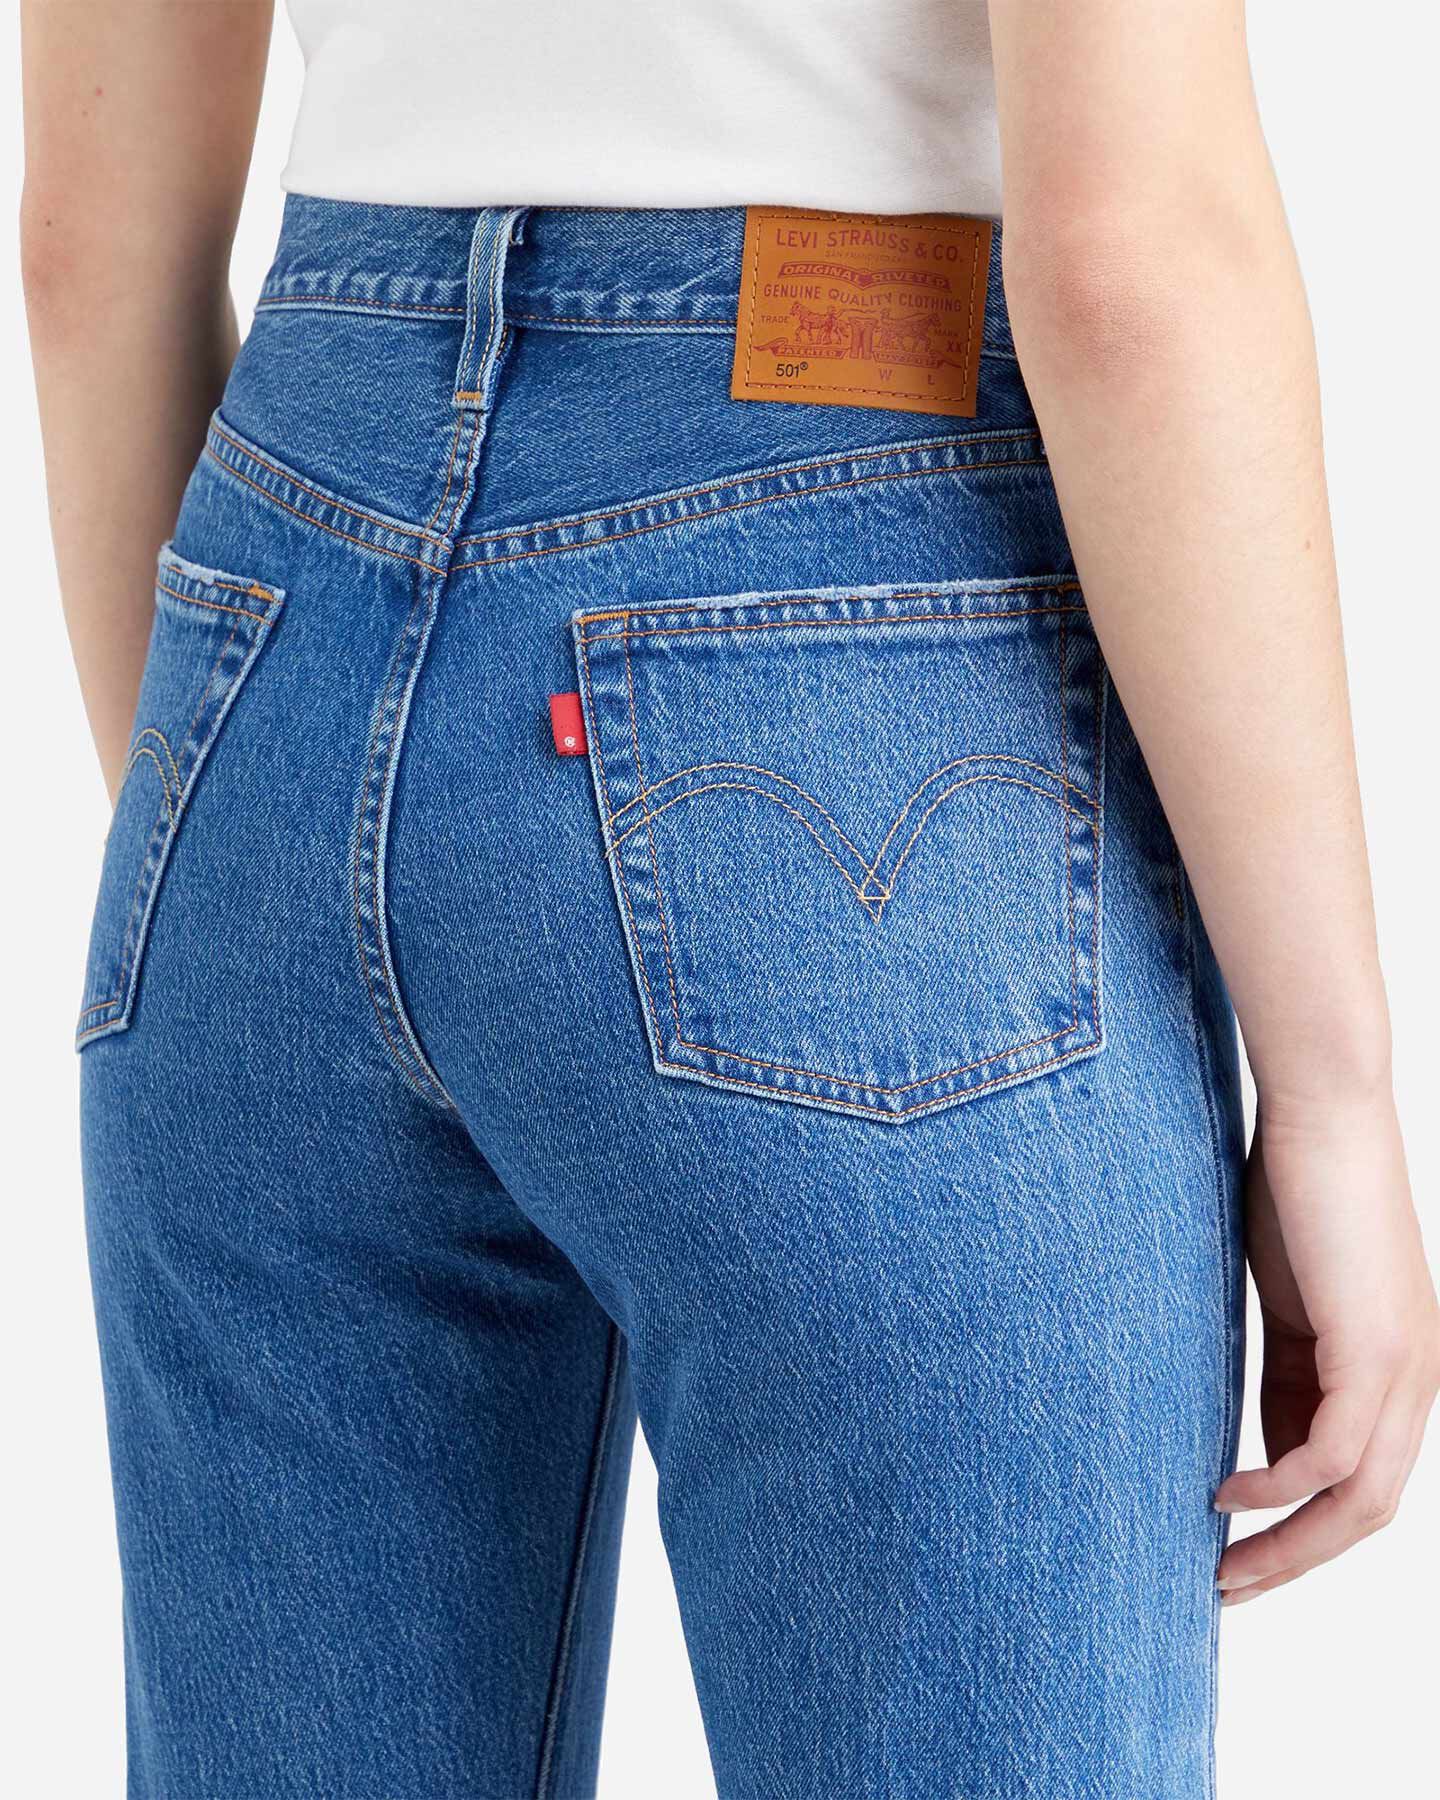  Jeans LEVI'S 501 CROP L28 W S4127913|0225|26 scatto 5